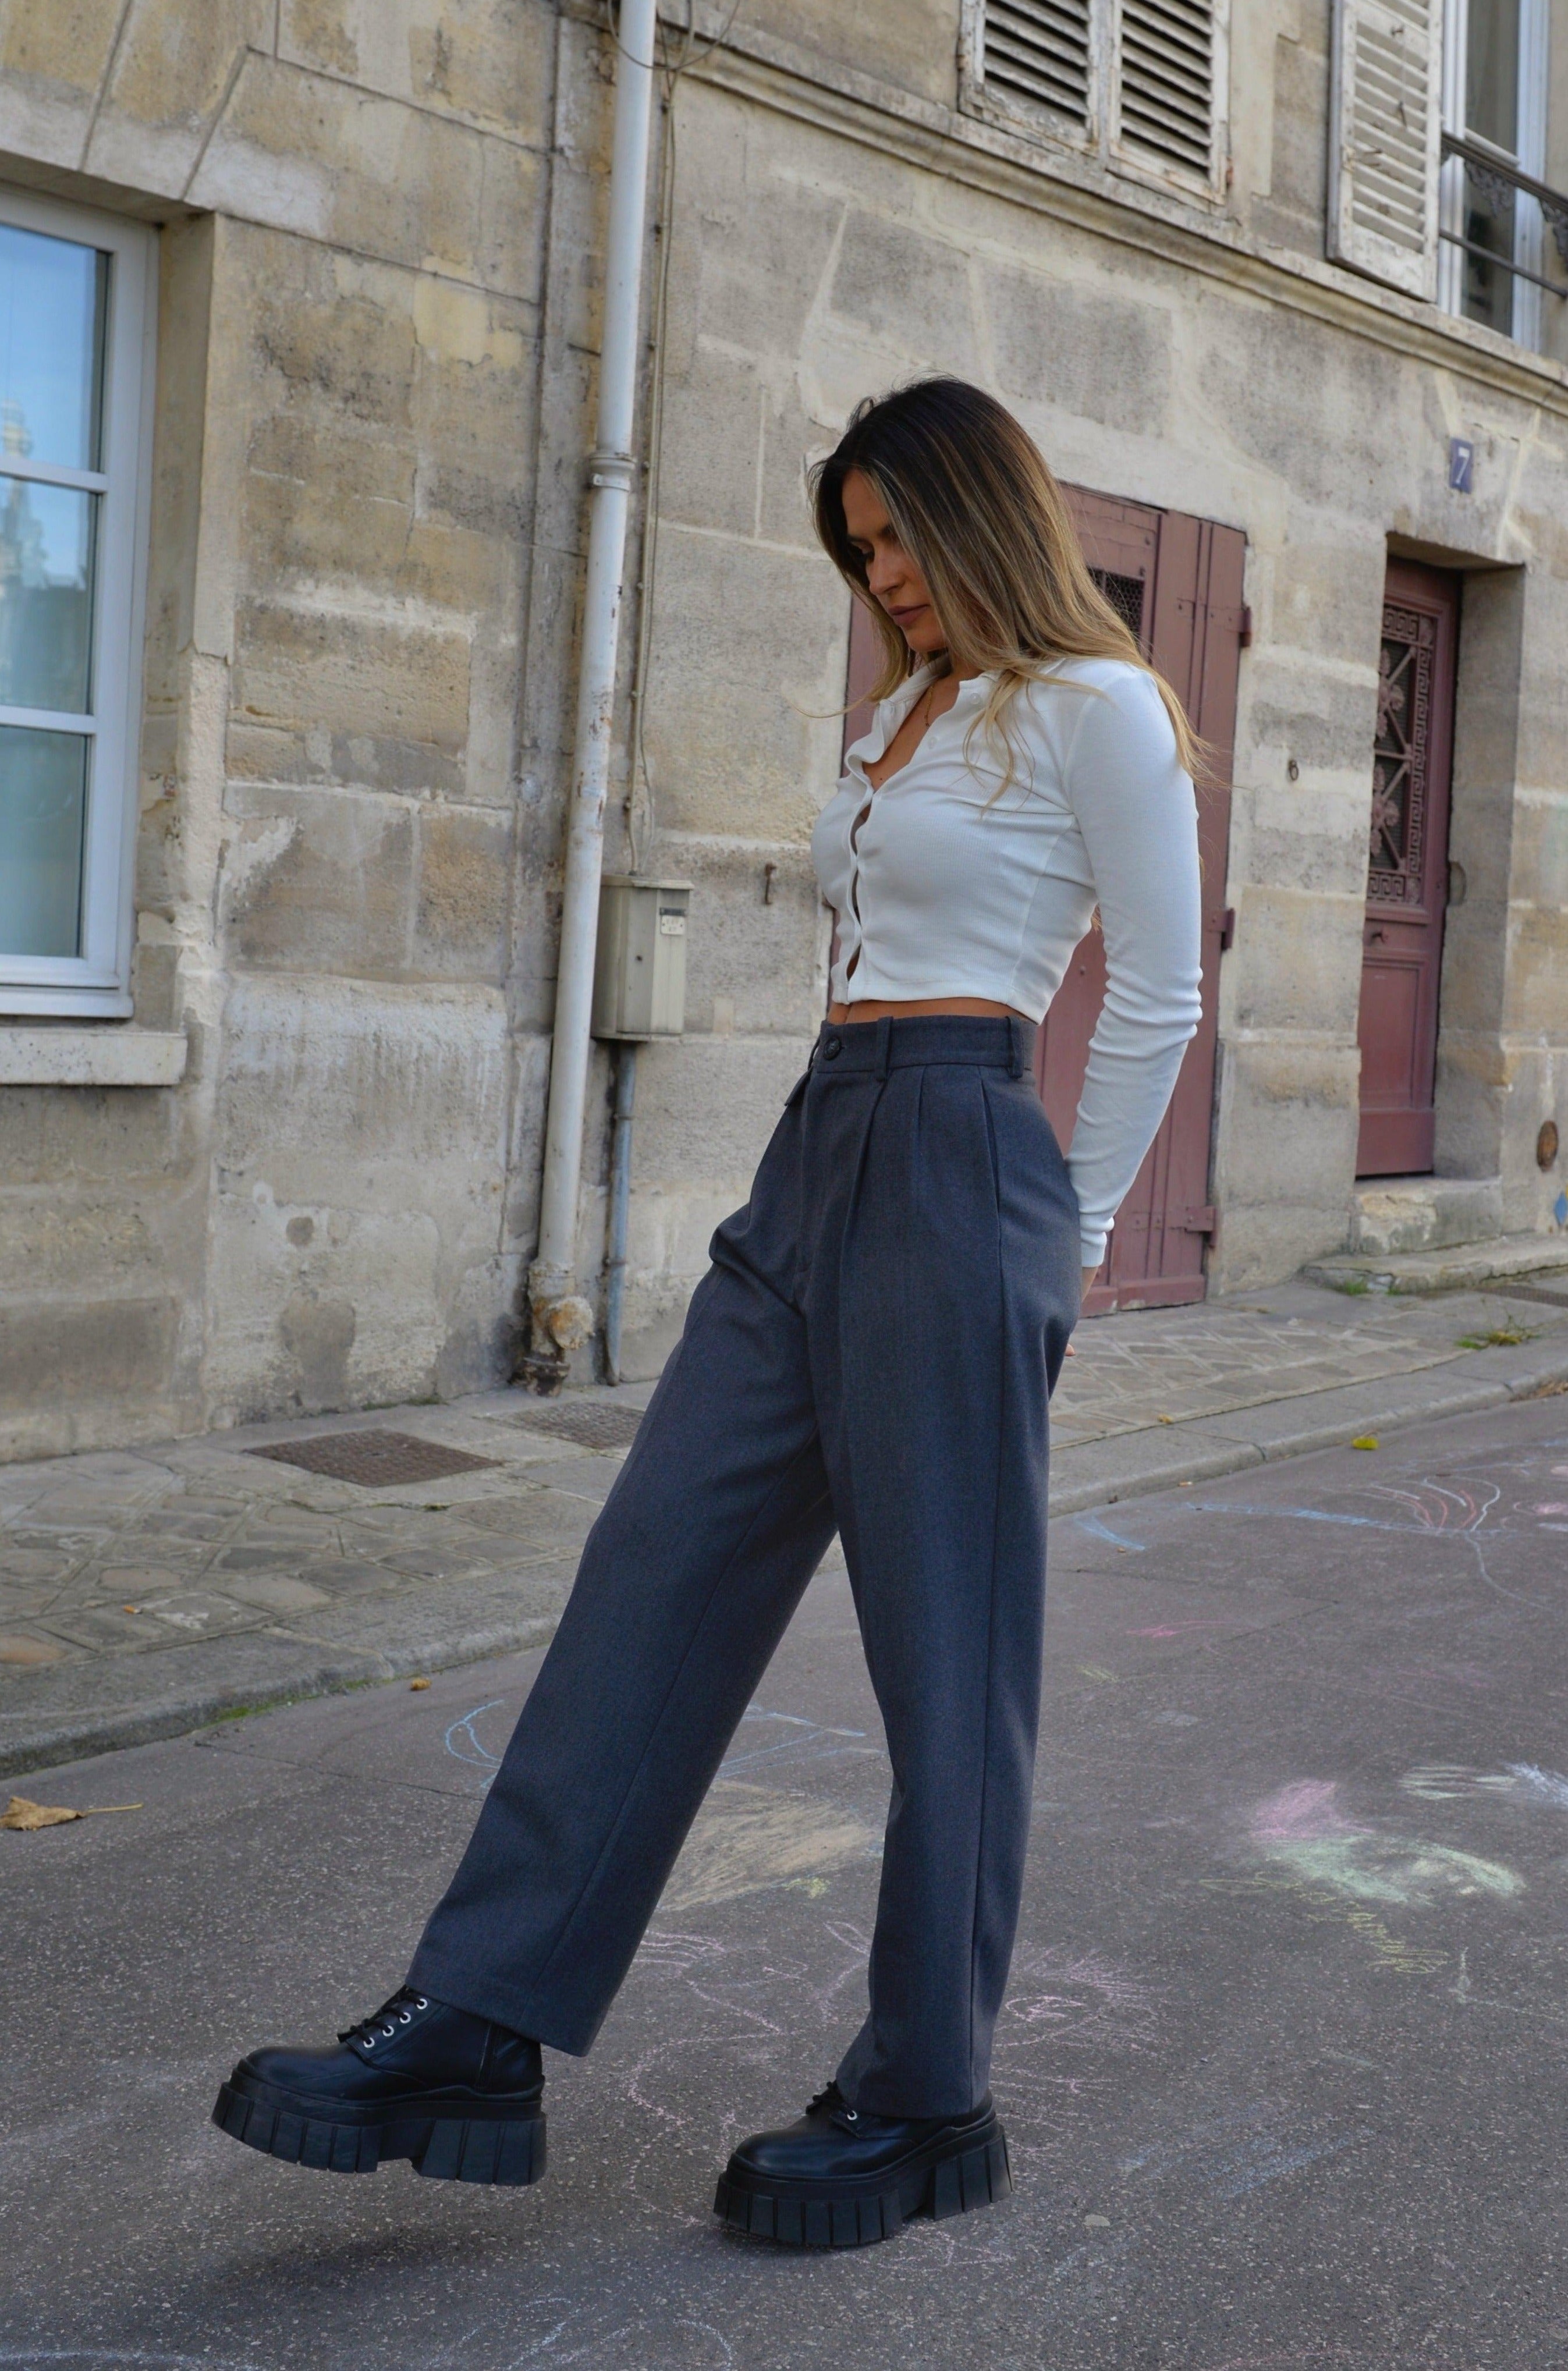 It's Official: Skinny Trousers Are Over, According To The Street-Style Set  | British Vogue